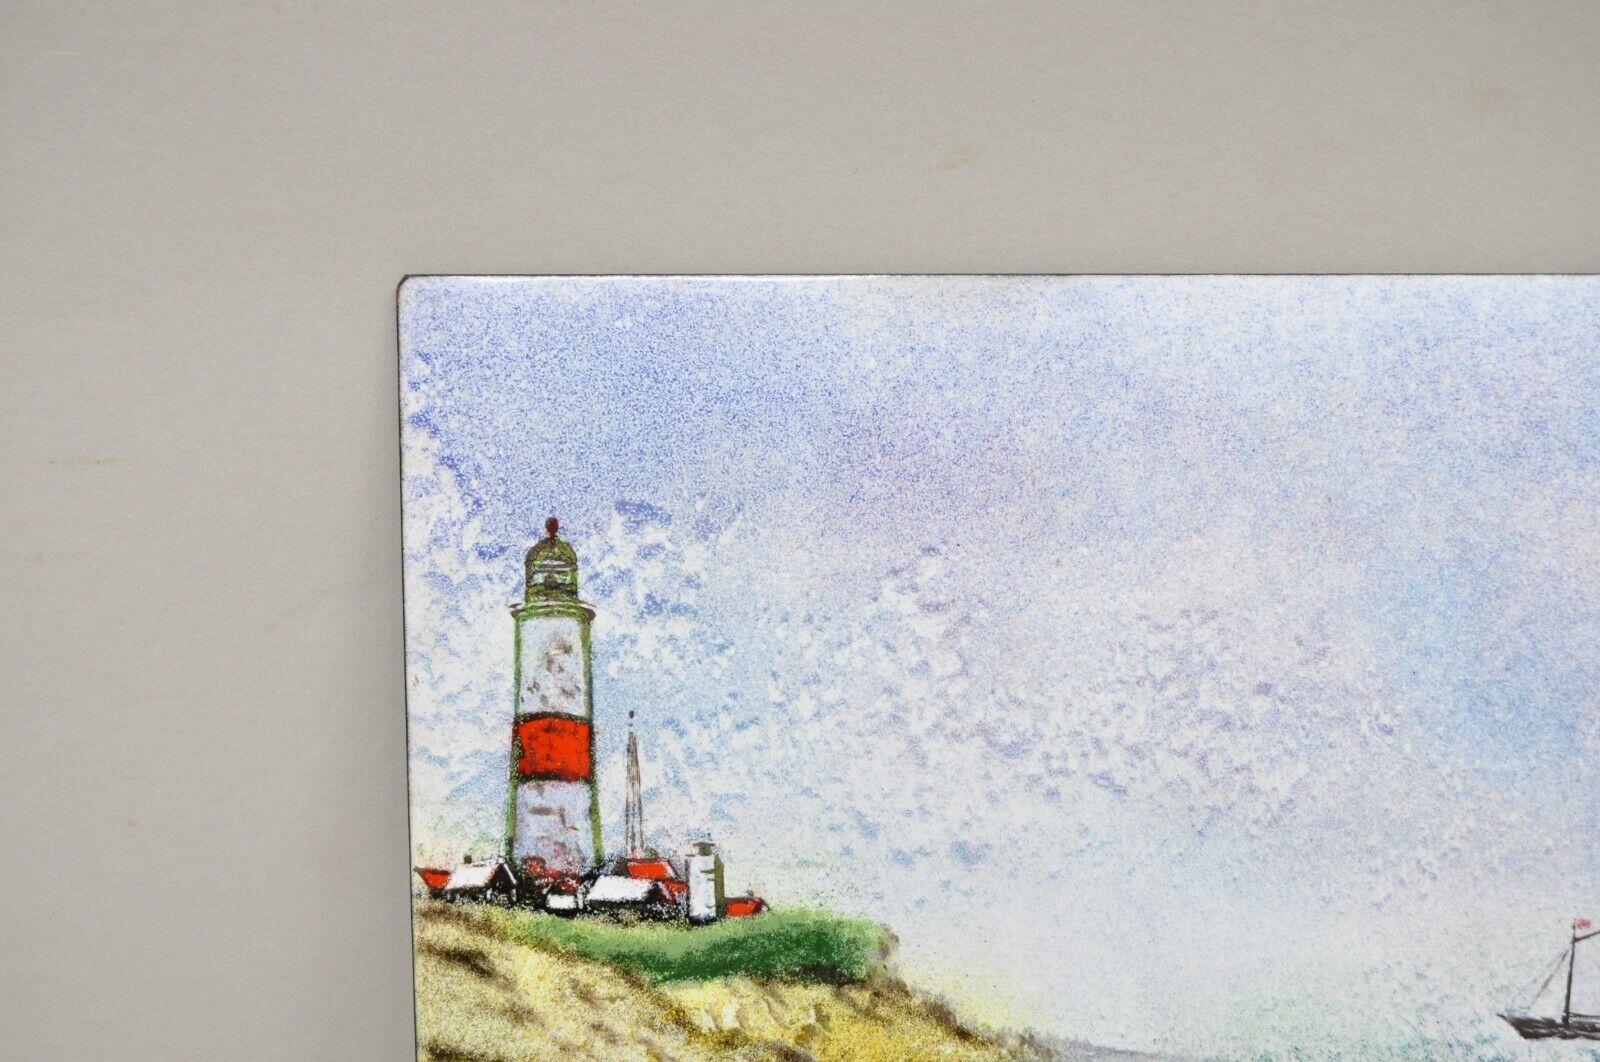 Dom Dominic Mingolla Enamel on Copper Painting Red Lighthouse Shoreline In Good Condition For Sale In Philadelphia, PA